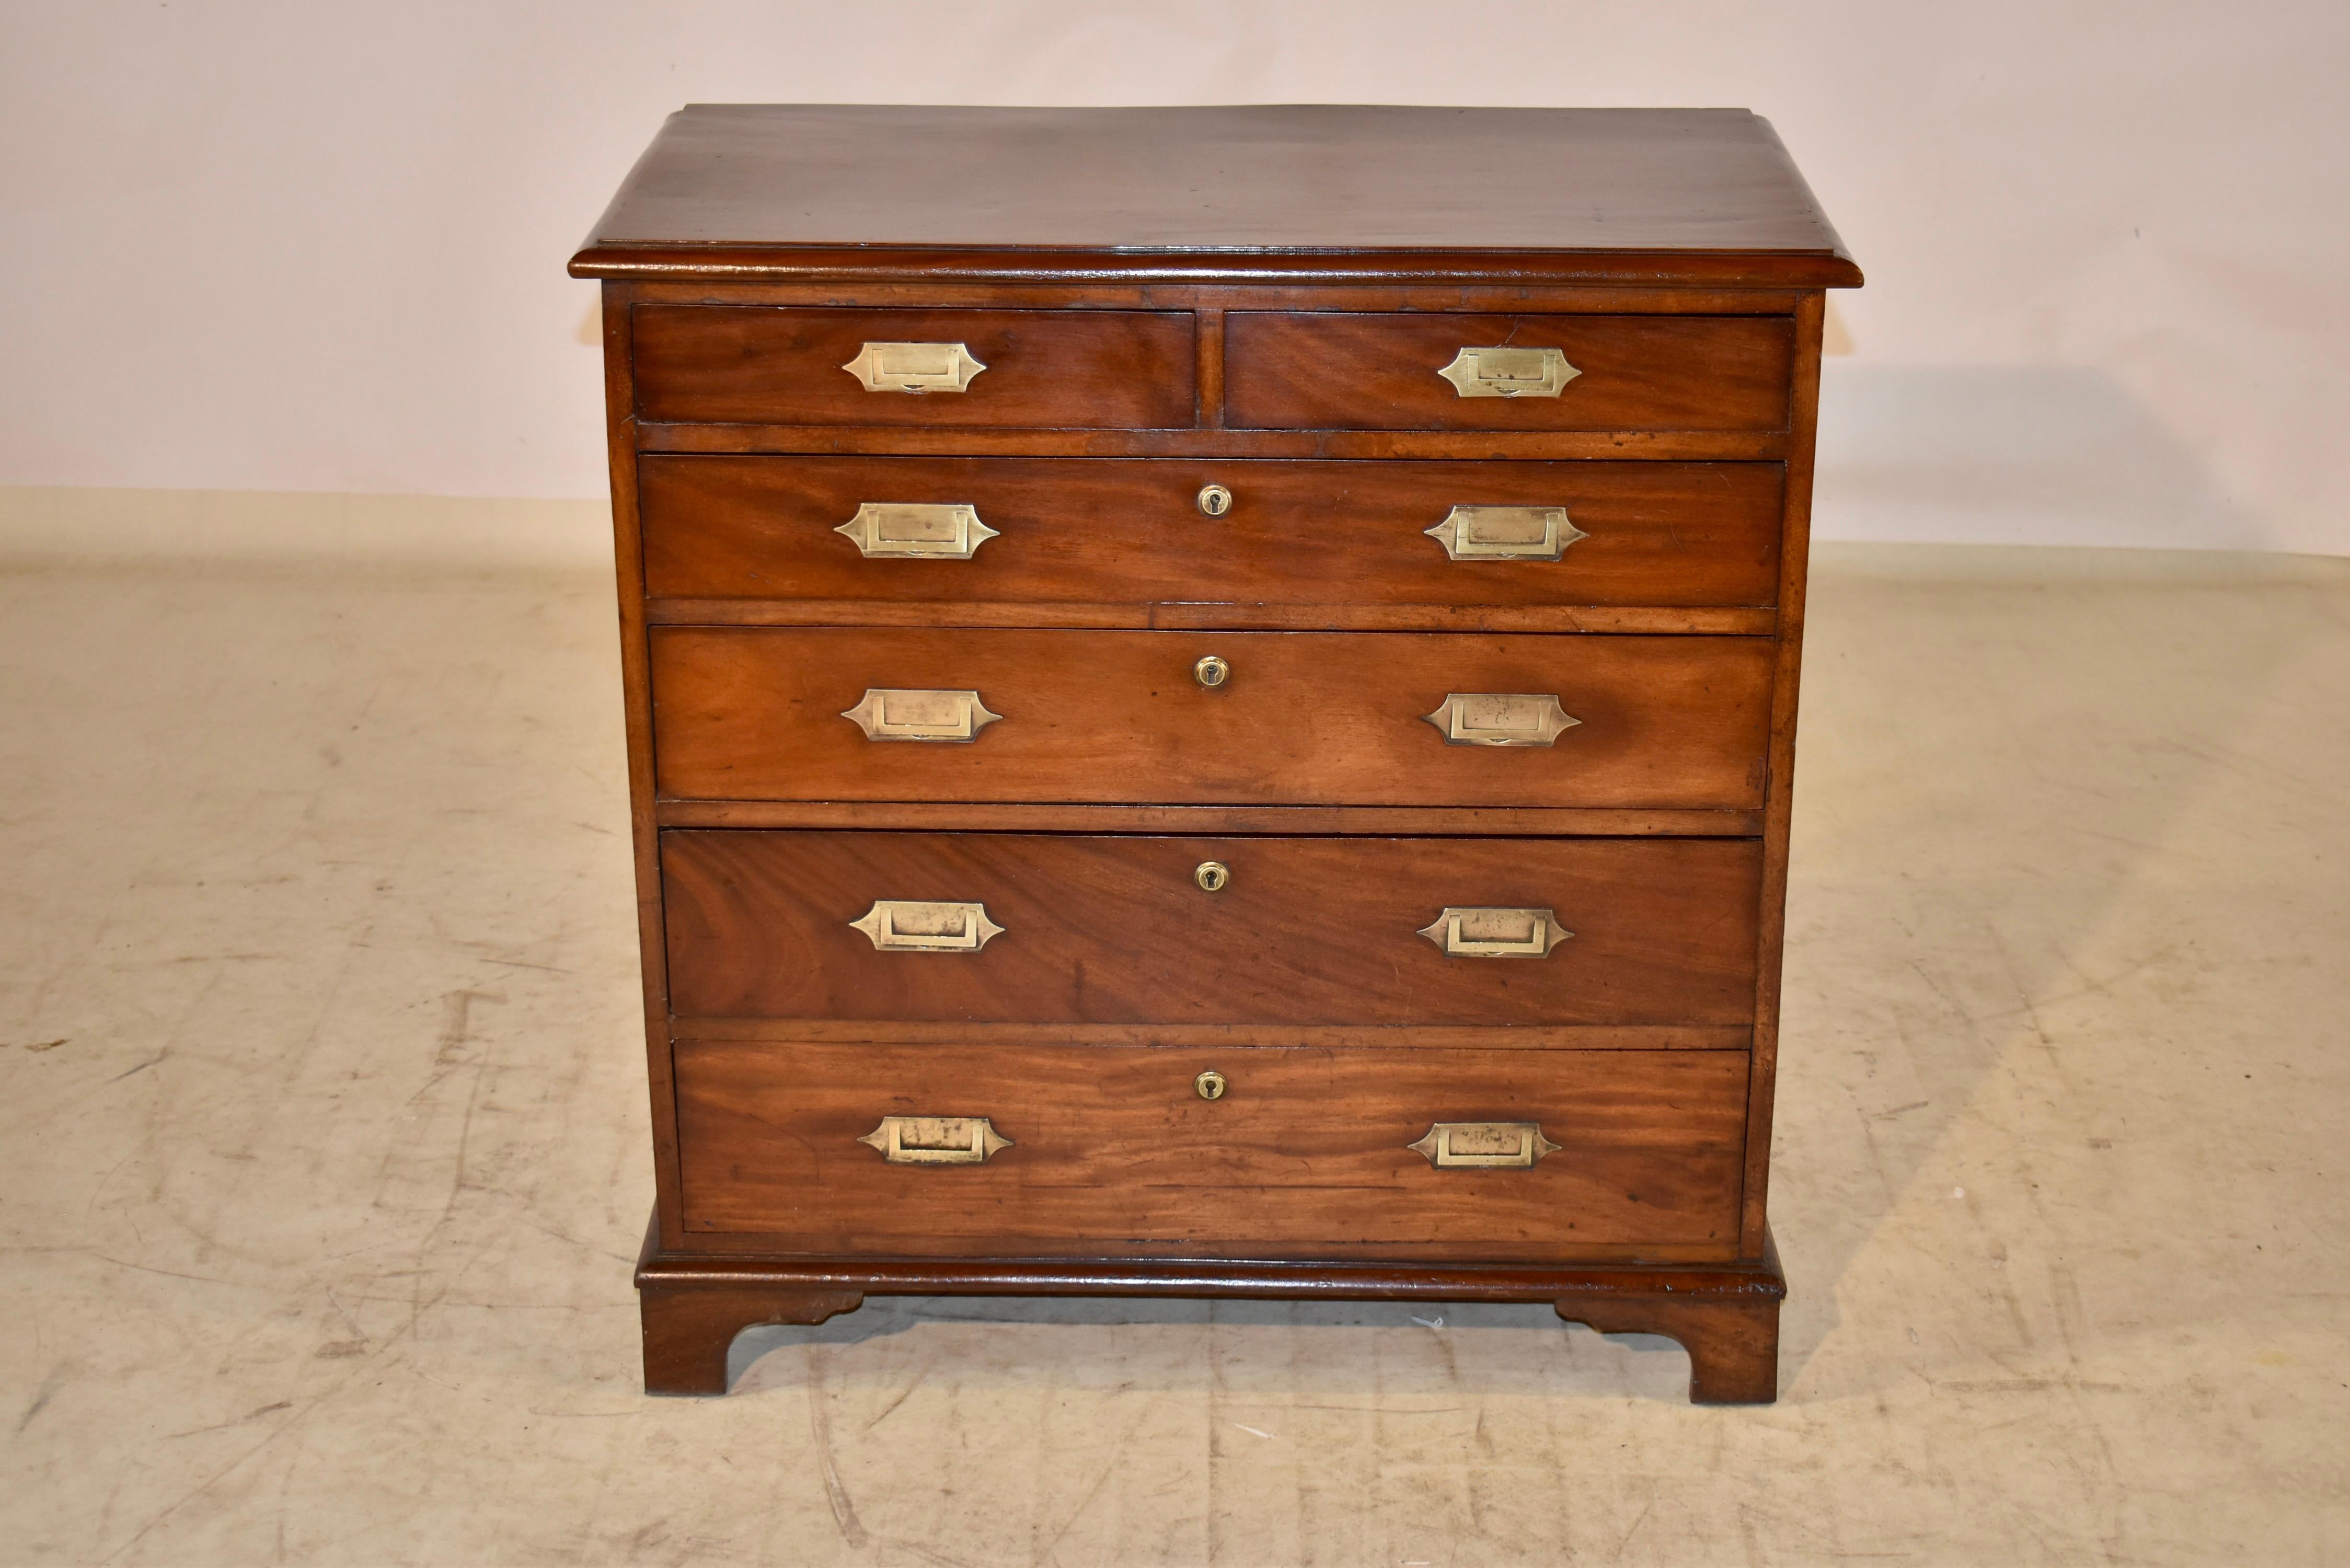 Early 19th century mahogany campaign chest of drawers from England. This is a wonderful chest with fabulous graining and color to the mahogany. The top is made from one solid board and the wood has so much movement in the grain, it was actually